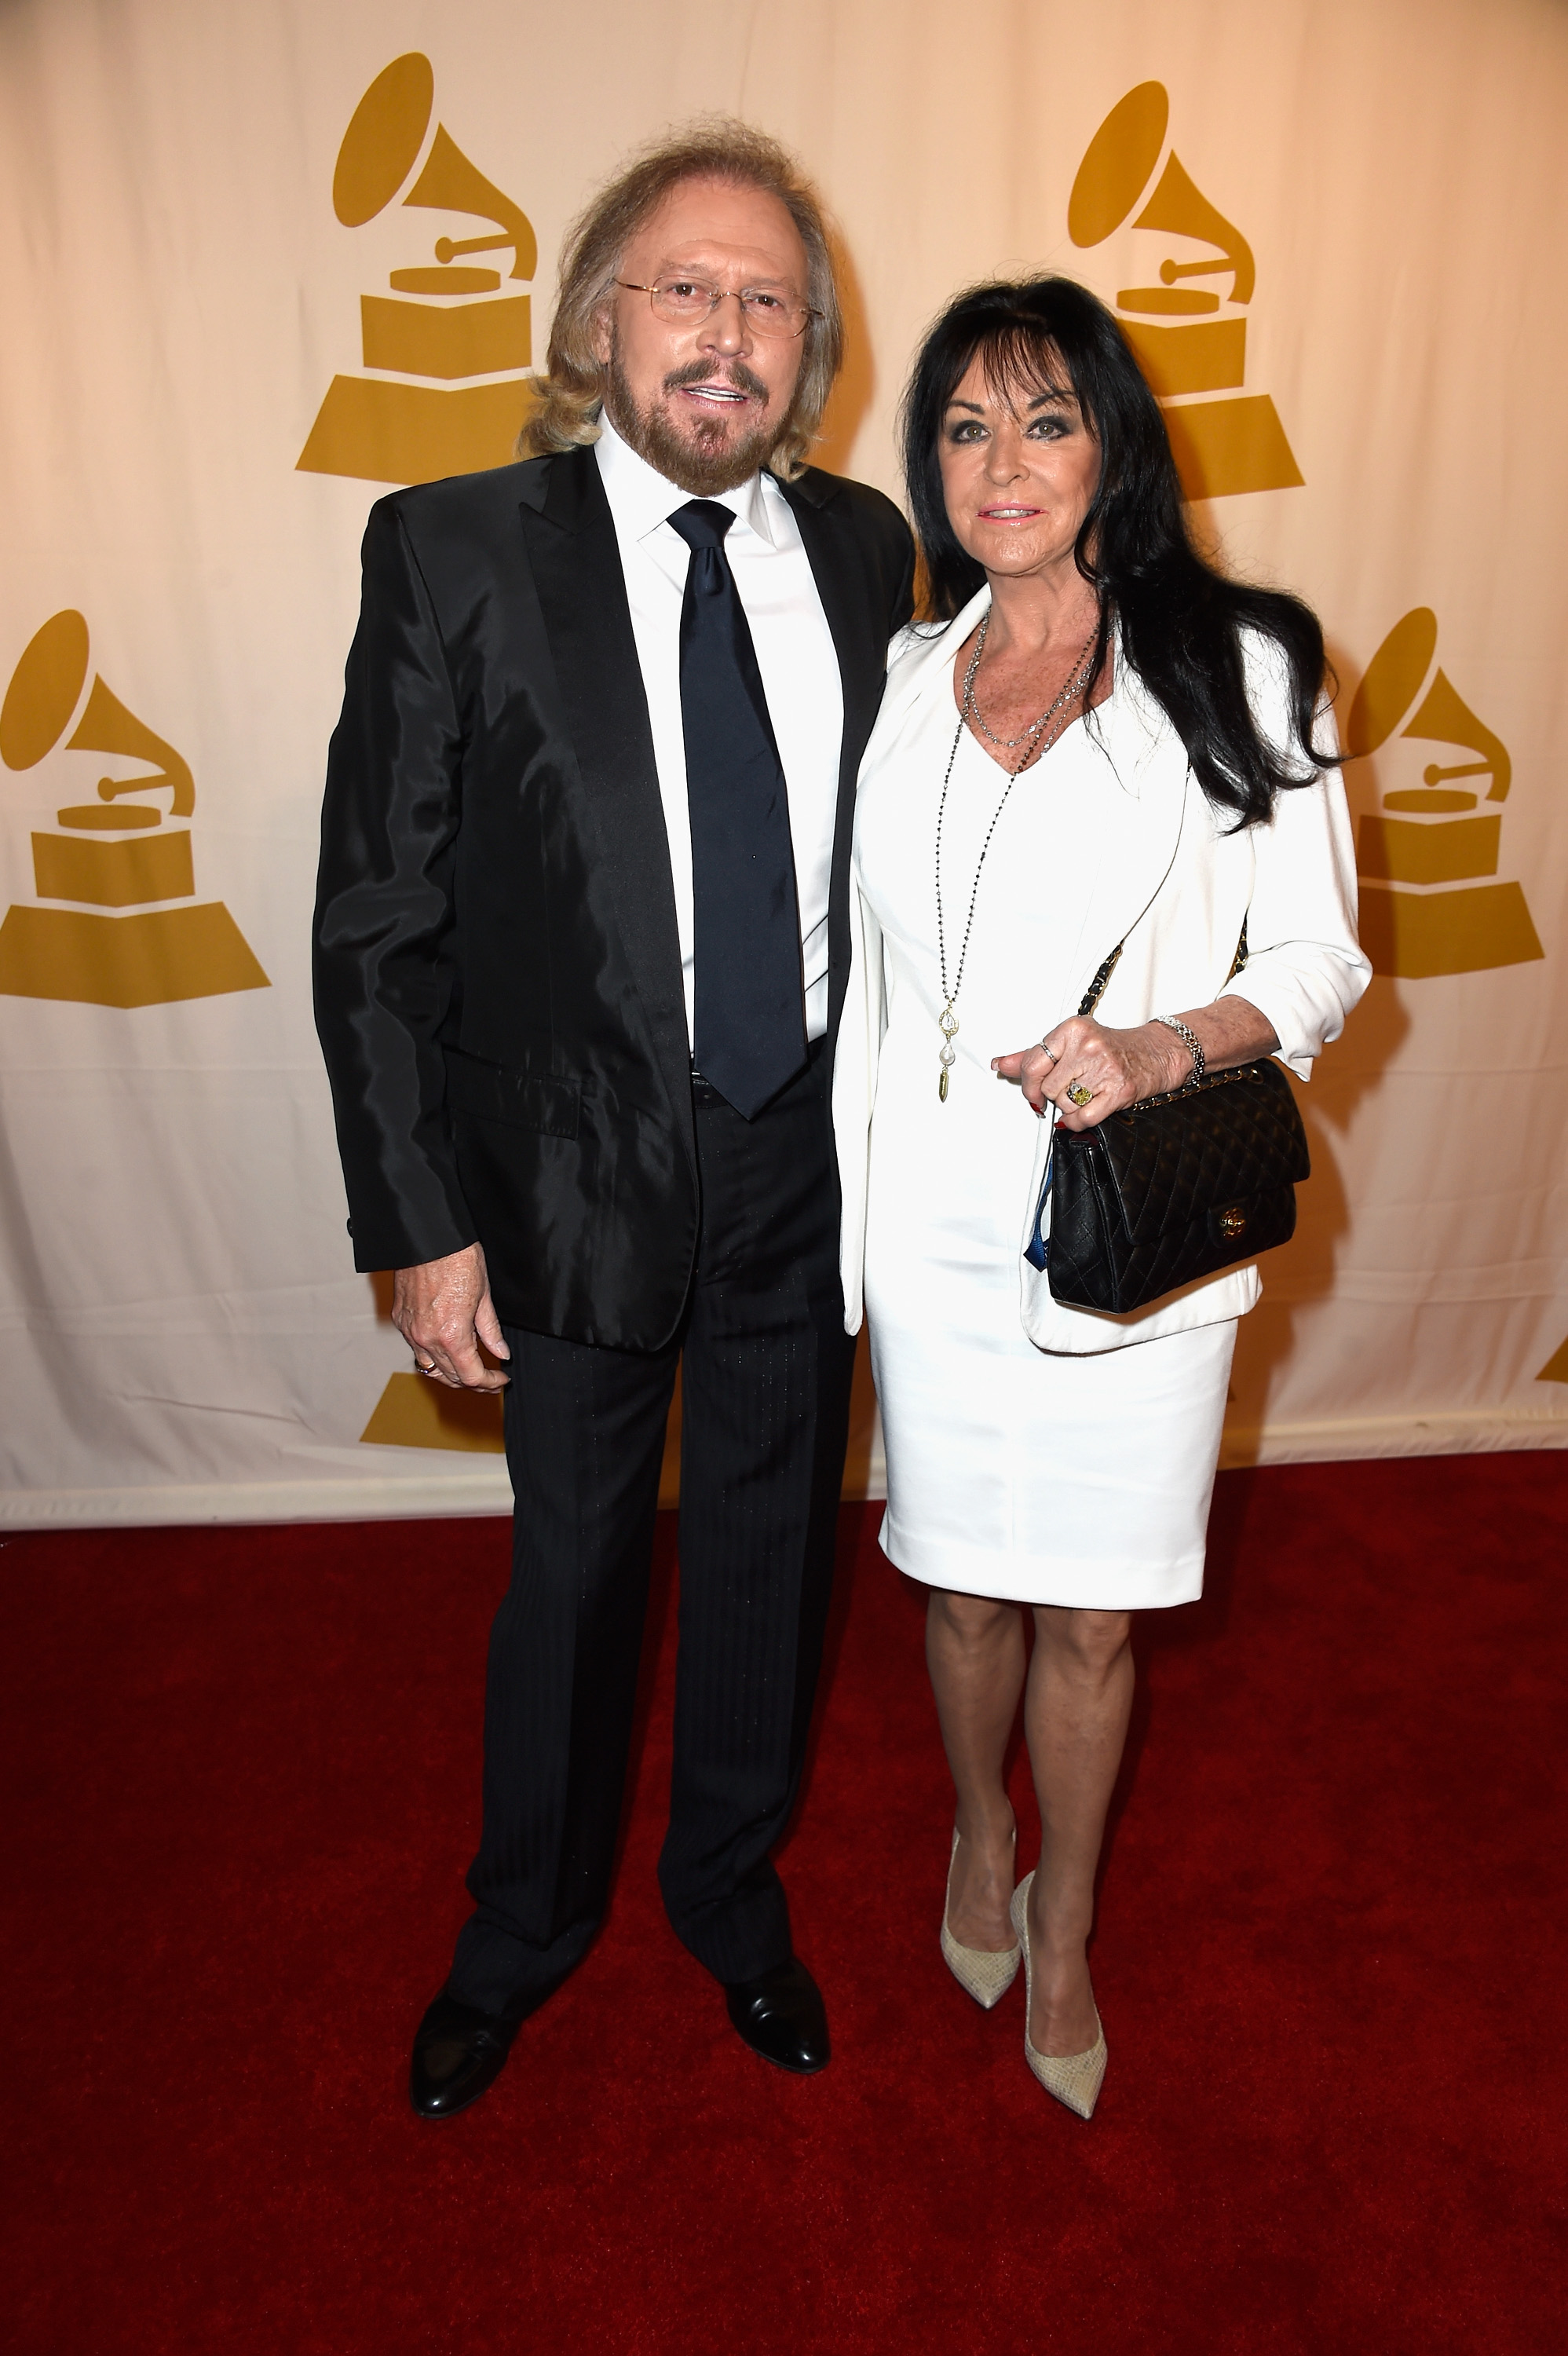 Barry Gibb and Linda Gray at the 57th Annual Grammy Awards in Los Angeles, 2015 | Source: Getty Images